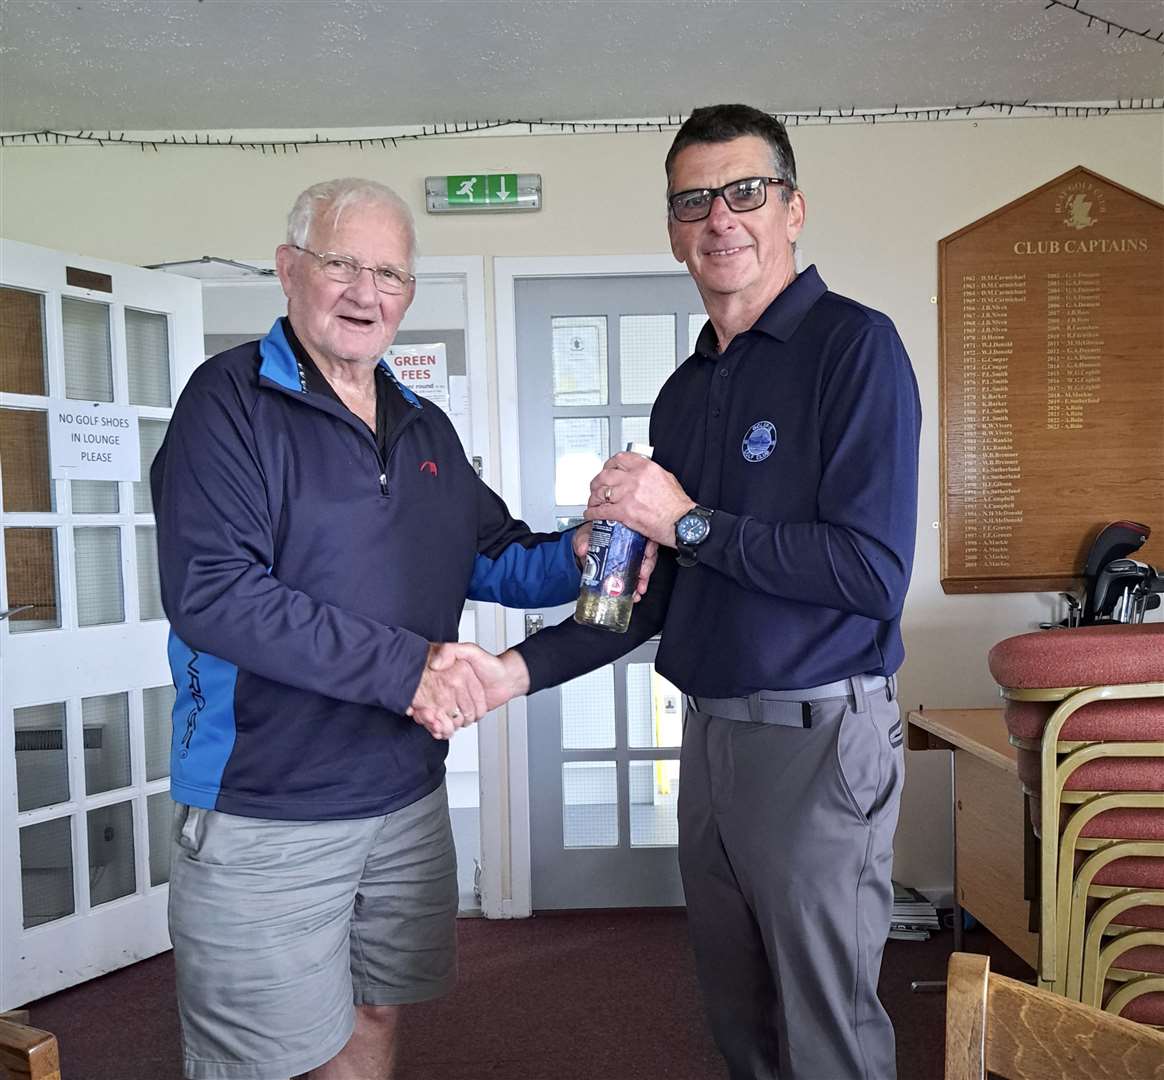 Malcolm Thomson (right) receives a bottle of North Point gin from Kenny Farmer Snr of the Reay seniors after winning the nearest-the-pin prize in the latest round of the senior Stableford competition.